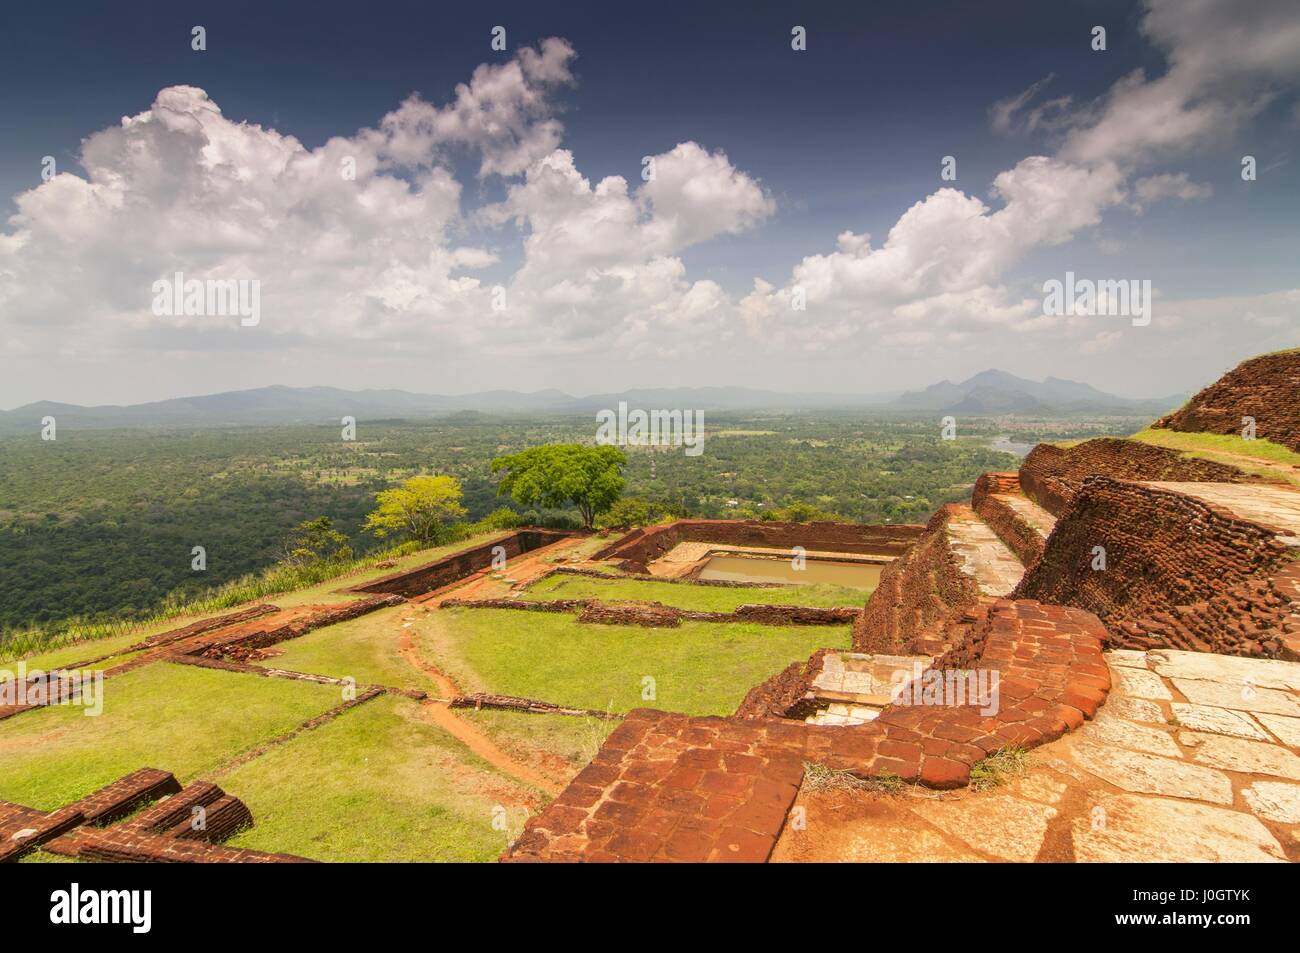 The ancient rock fortress of Yapahuwa is similar to, but smaller than,  Sigiriya. Dating from the 13th century, it was the capital and main  stronghold of King Bhuvanekabahu I (1272 - 1284)